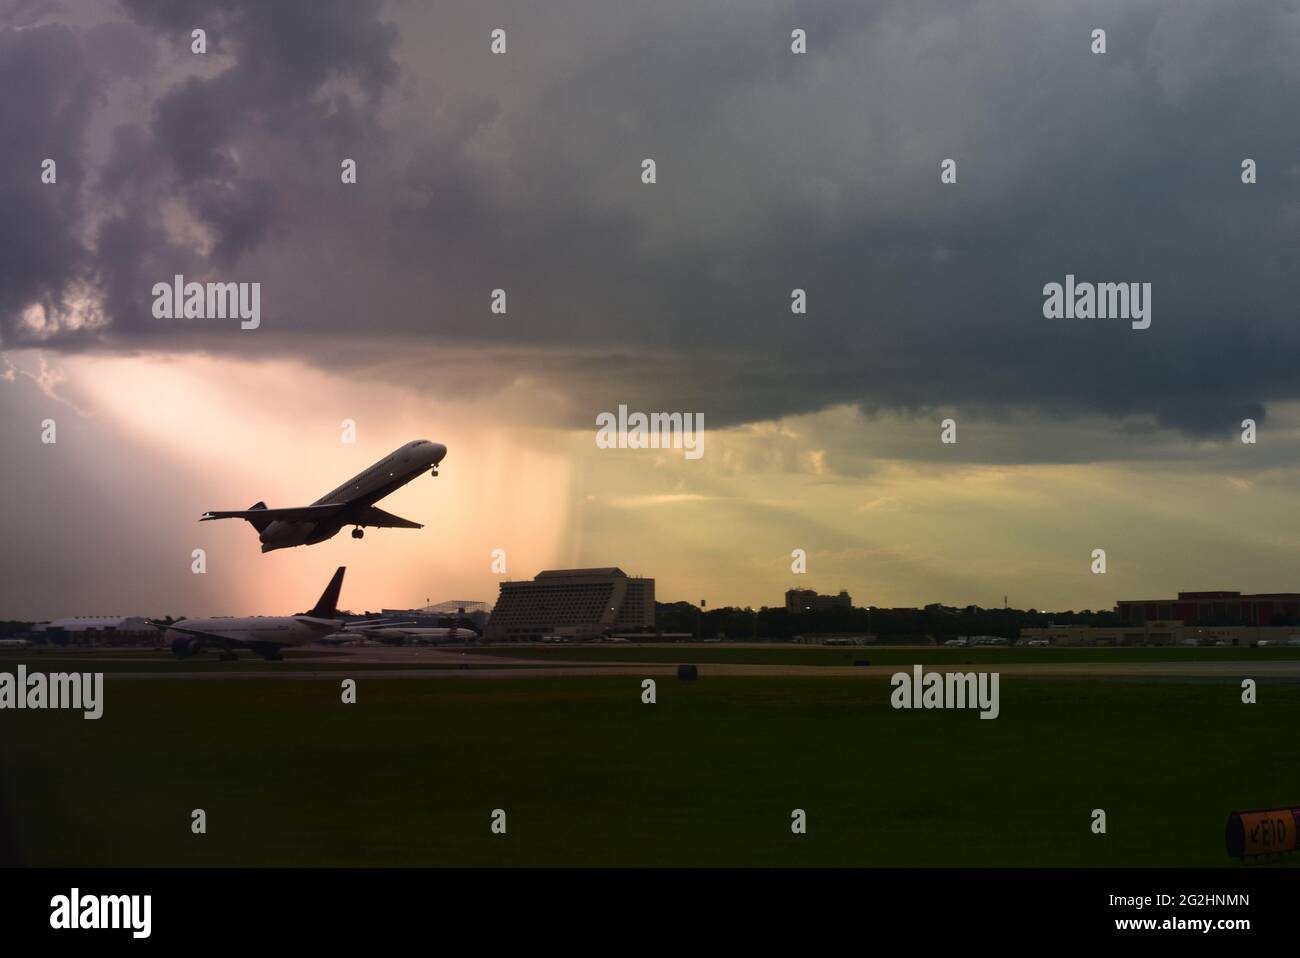 Small Regional Jet taking off from Hartsfield Jackson Atlanta Airport in Rain Storm during sunset Stock Photo